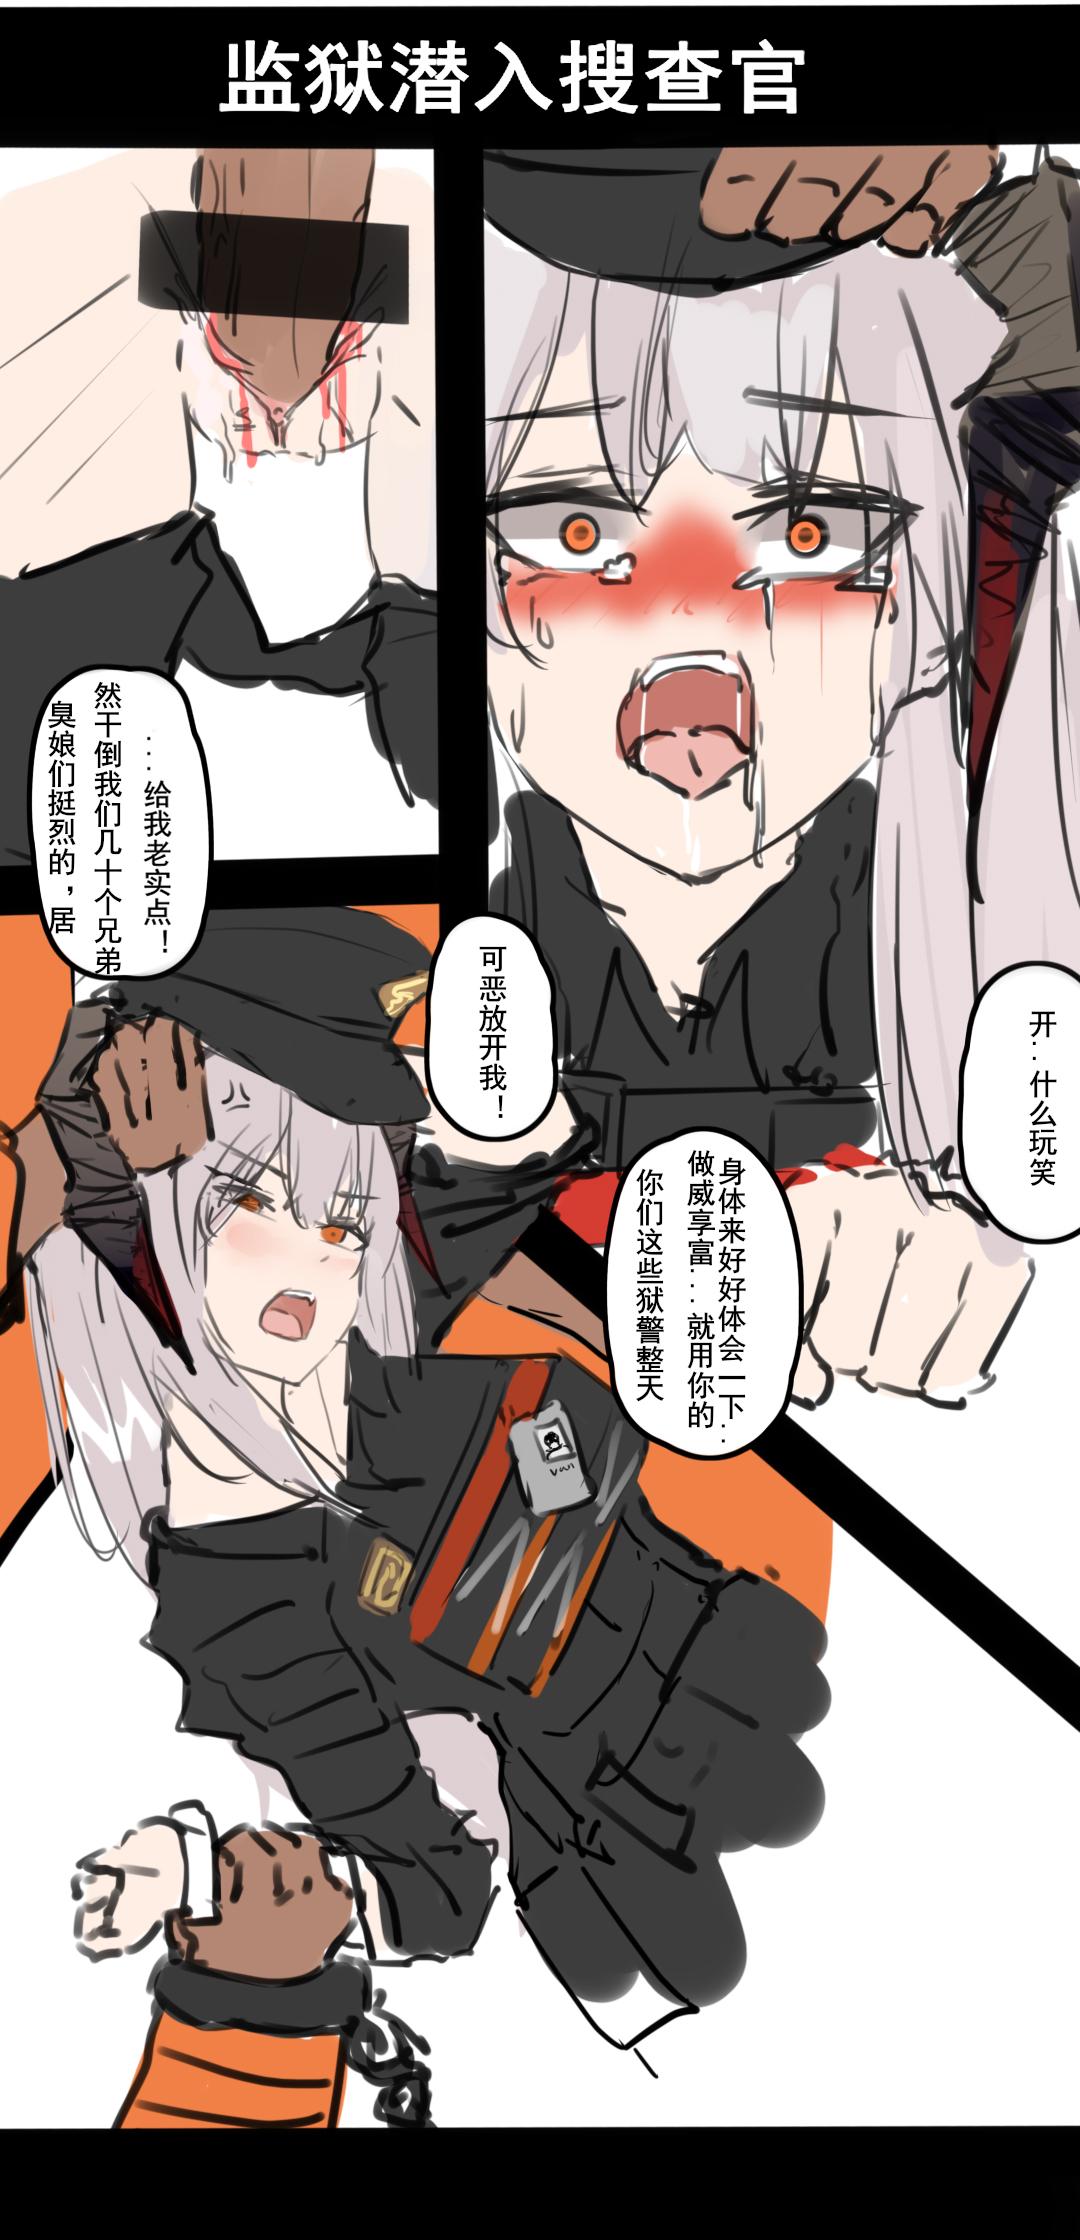 Fuck 监狱潜入搜查官*鬼父科西切 - Arknights Gay Fucking - Picture 1